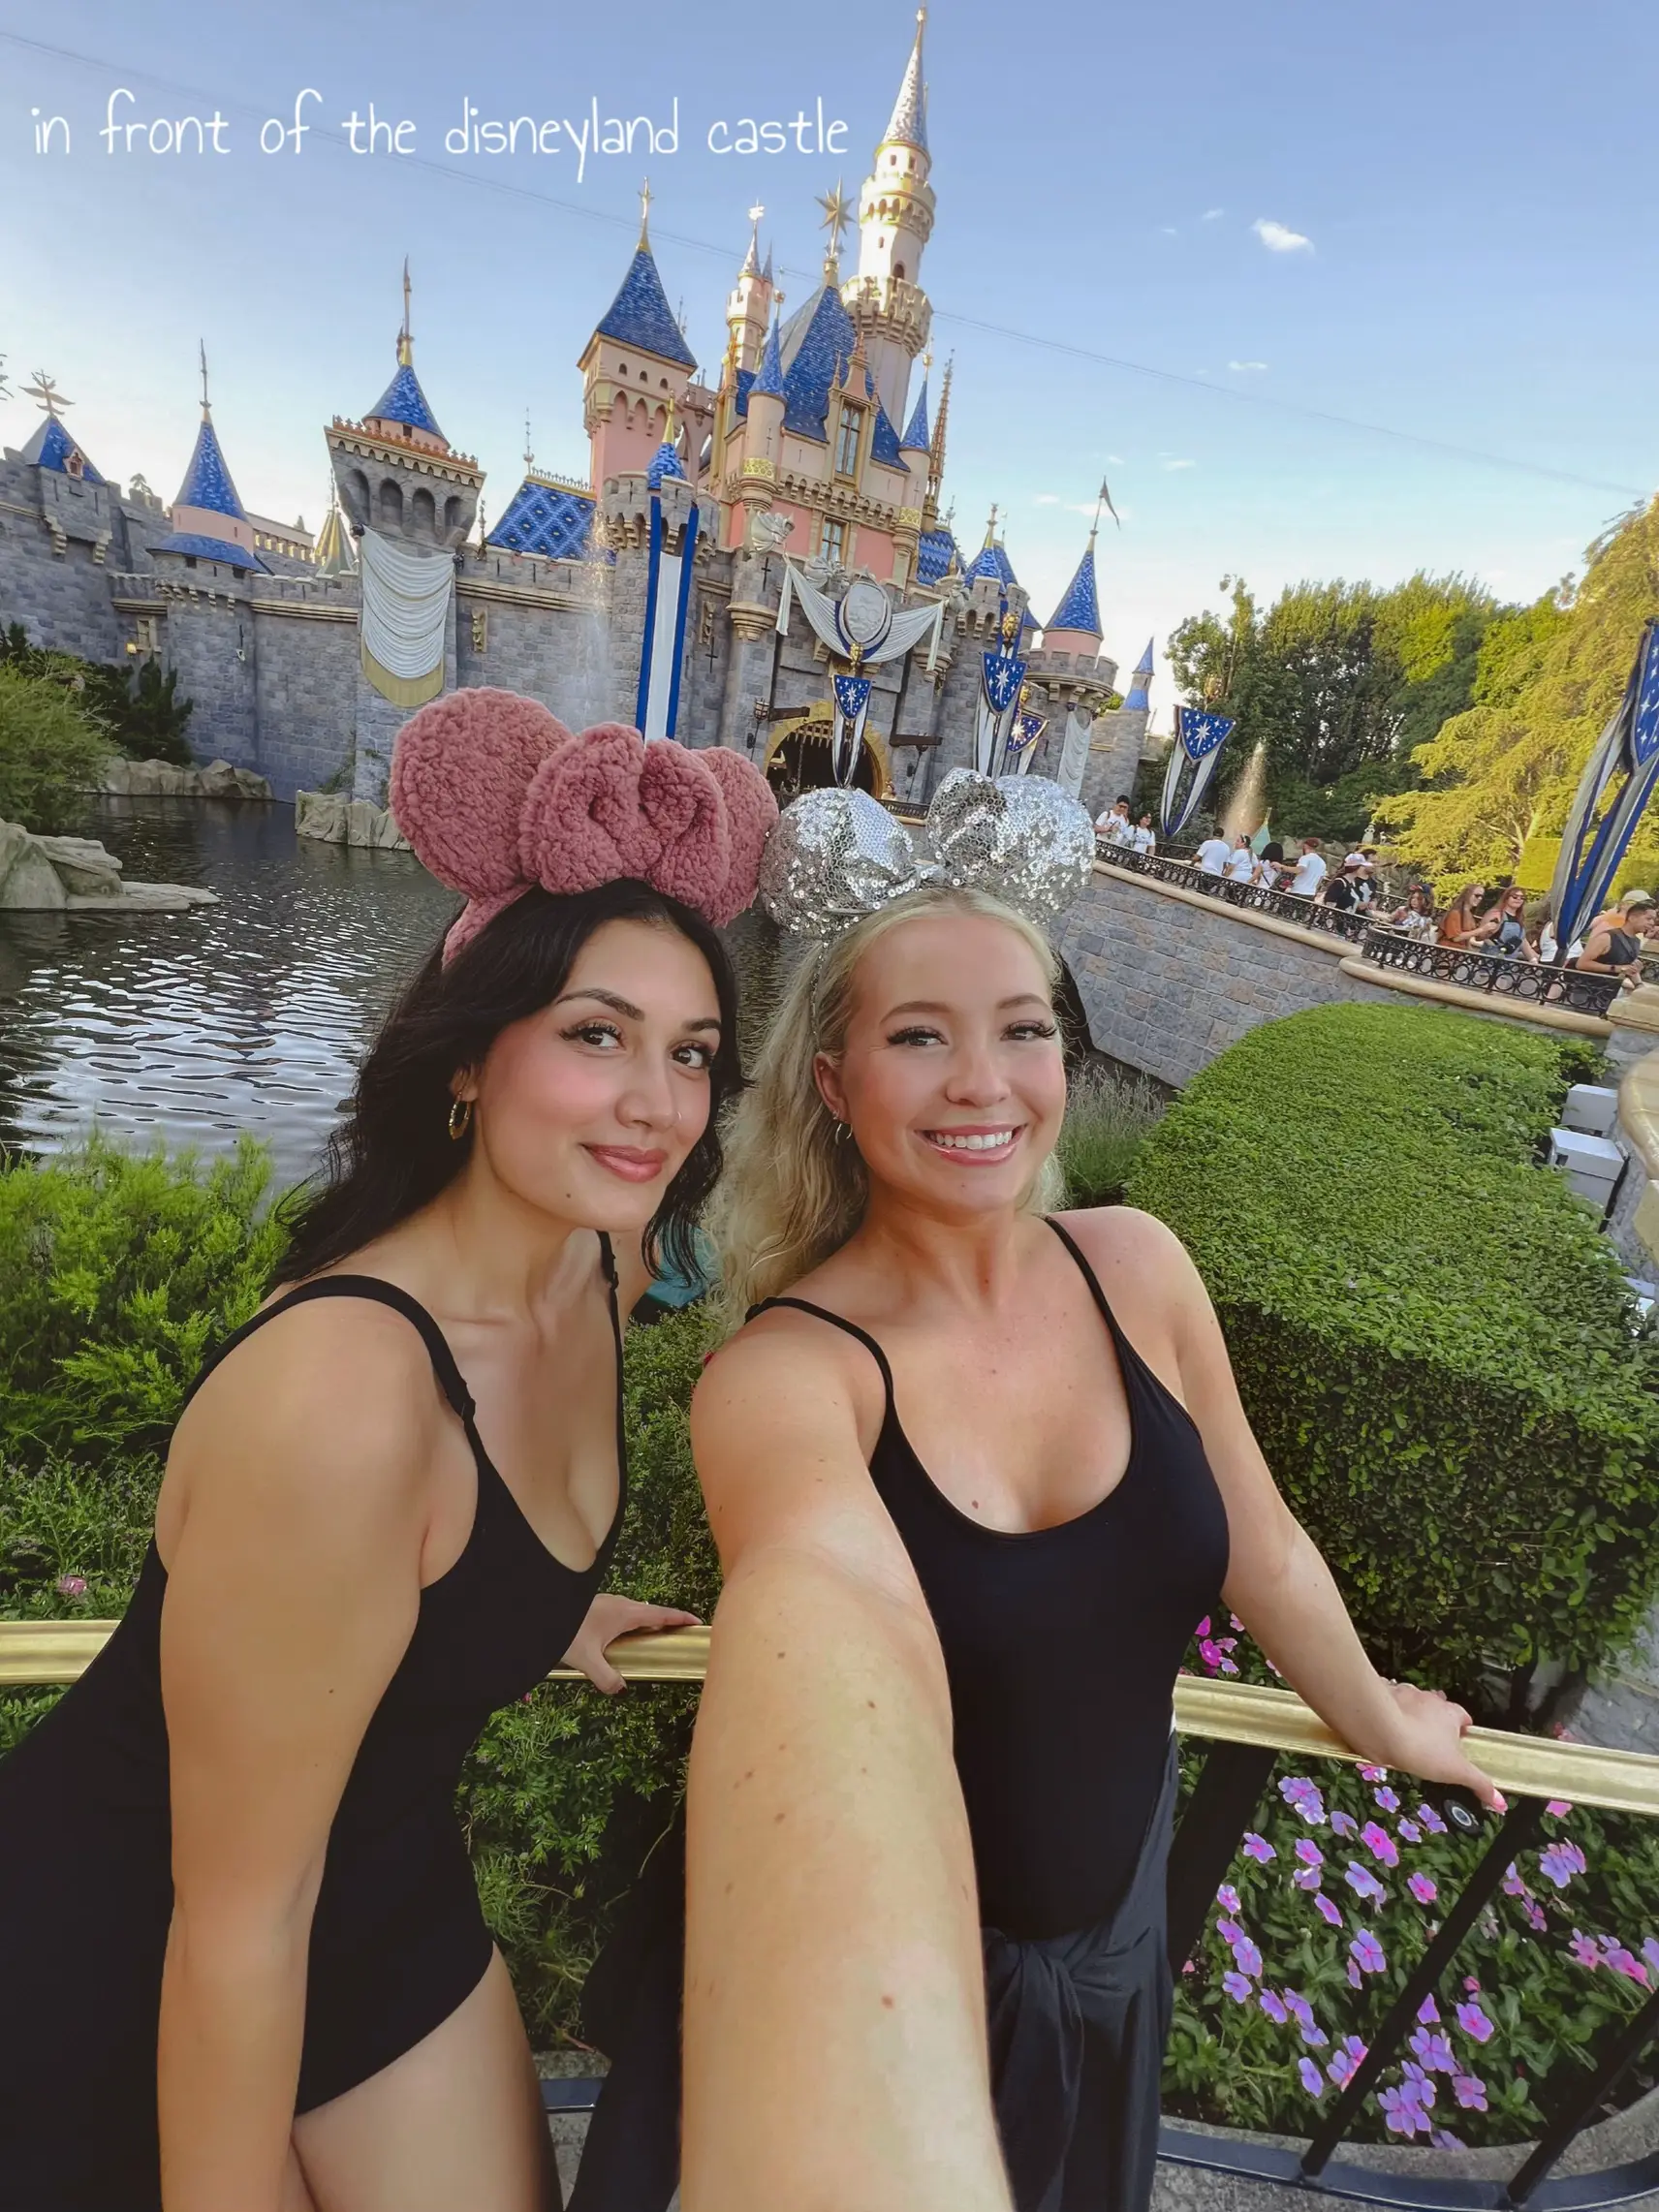  Two women wearing black dresses and pink hats are taking a selfie in front of a castle.